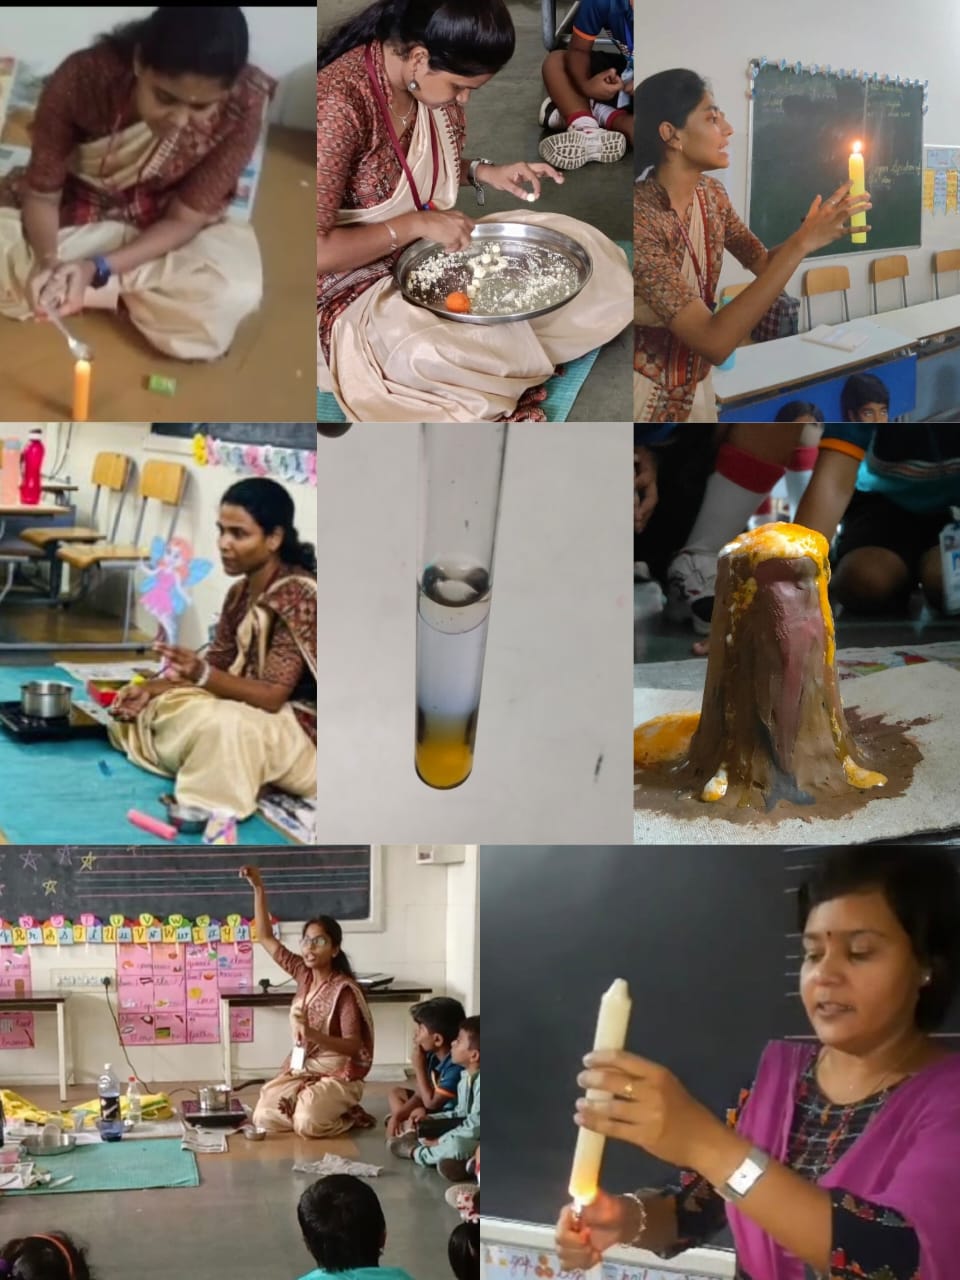 A story was weaved and activities were demonstrated to illustrate the Cosmos to children and  ignite their natural curiosity.